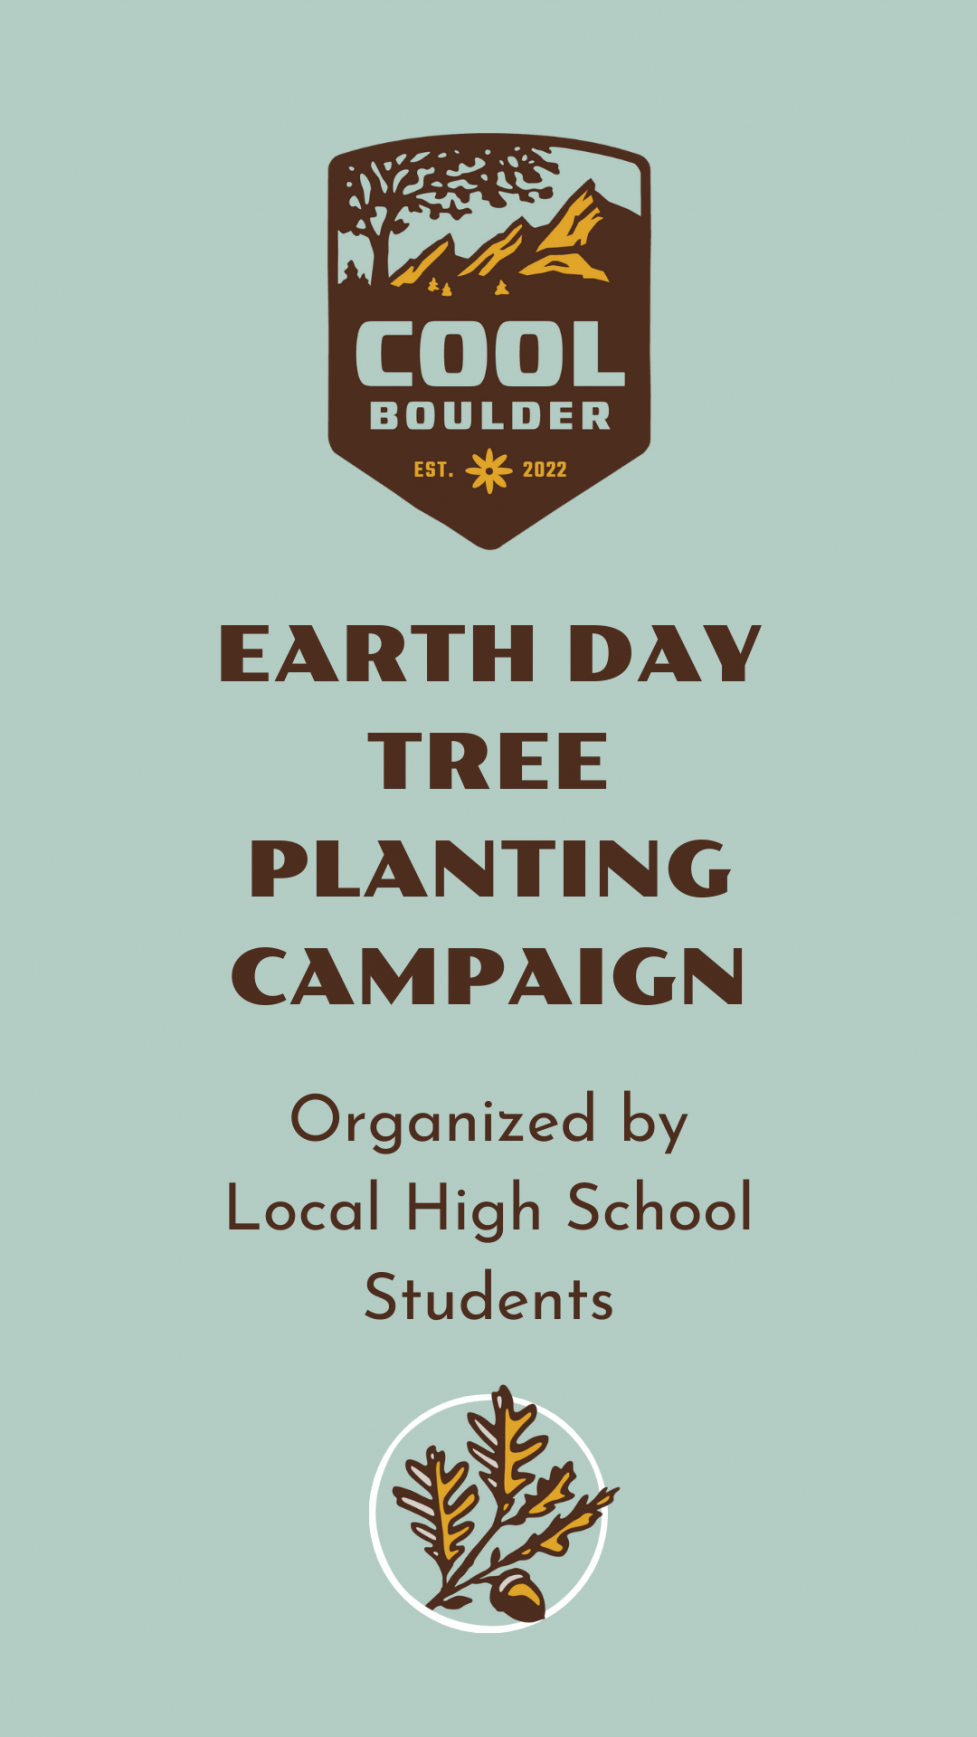 Earth day tree planting campaign organized by local high school students